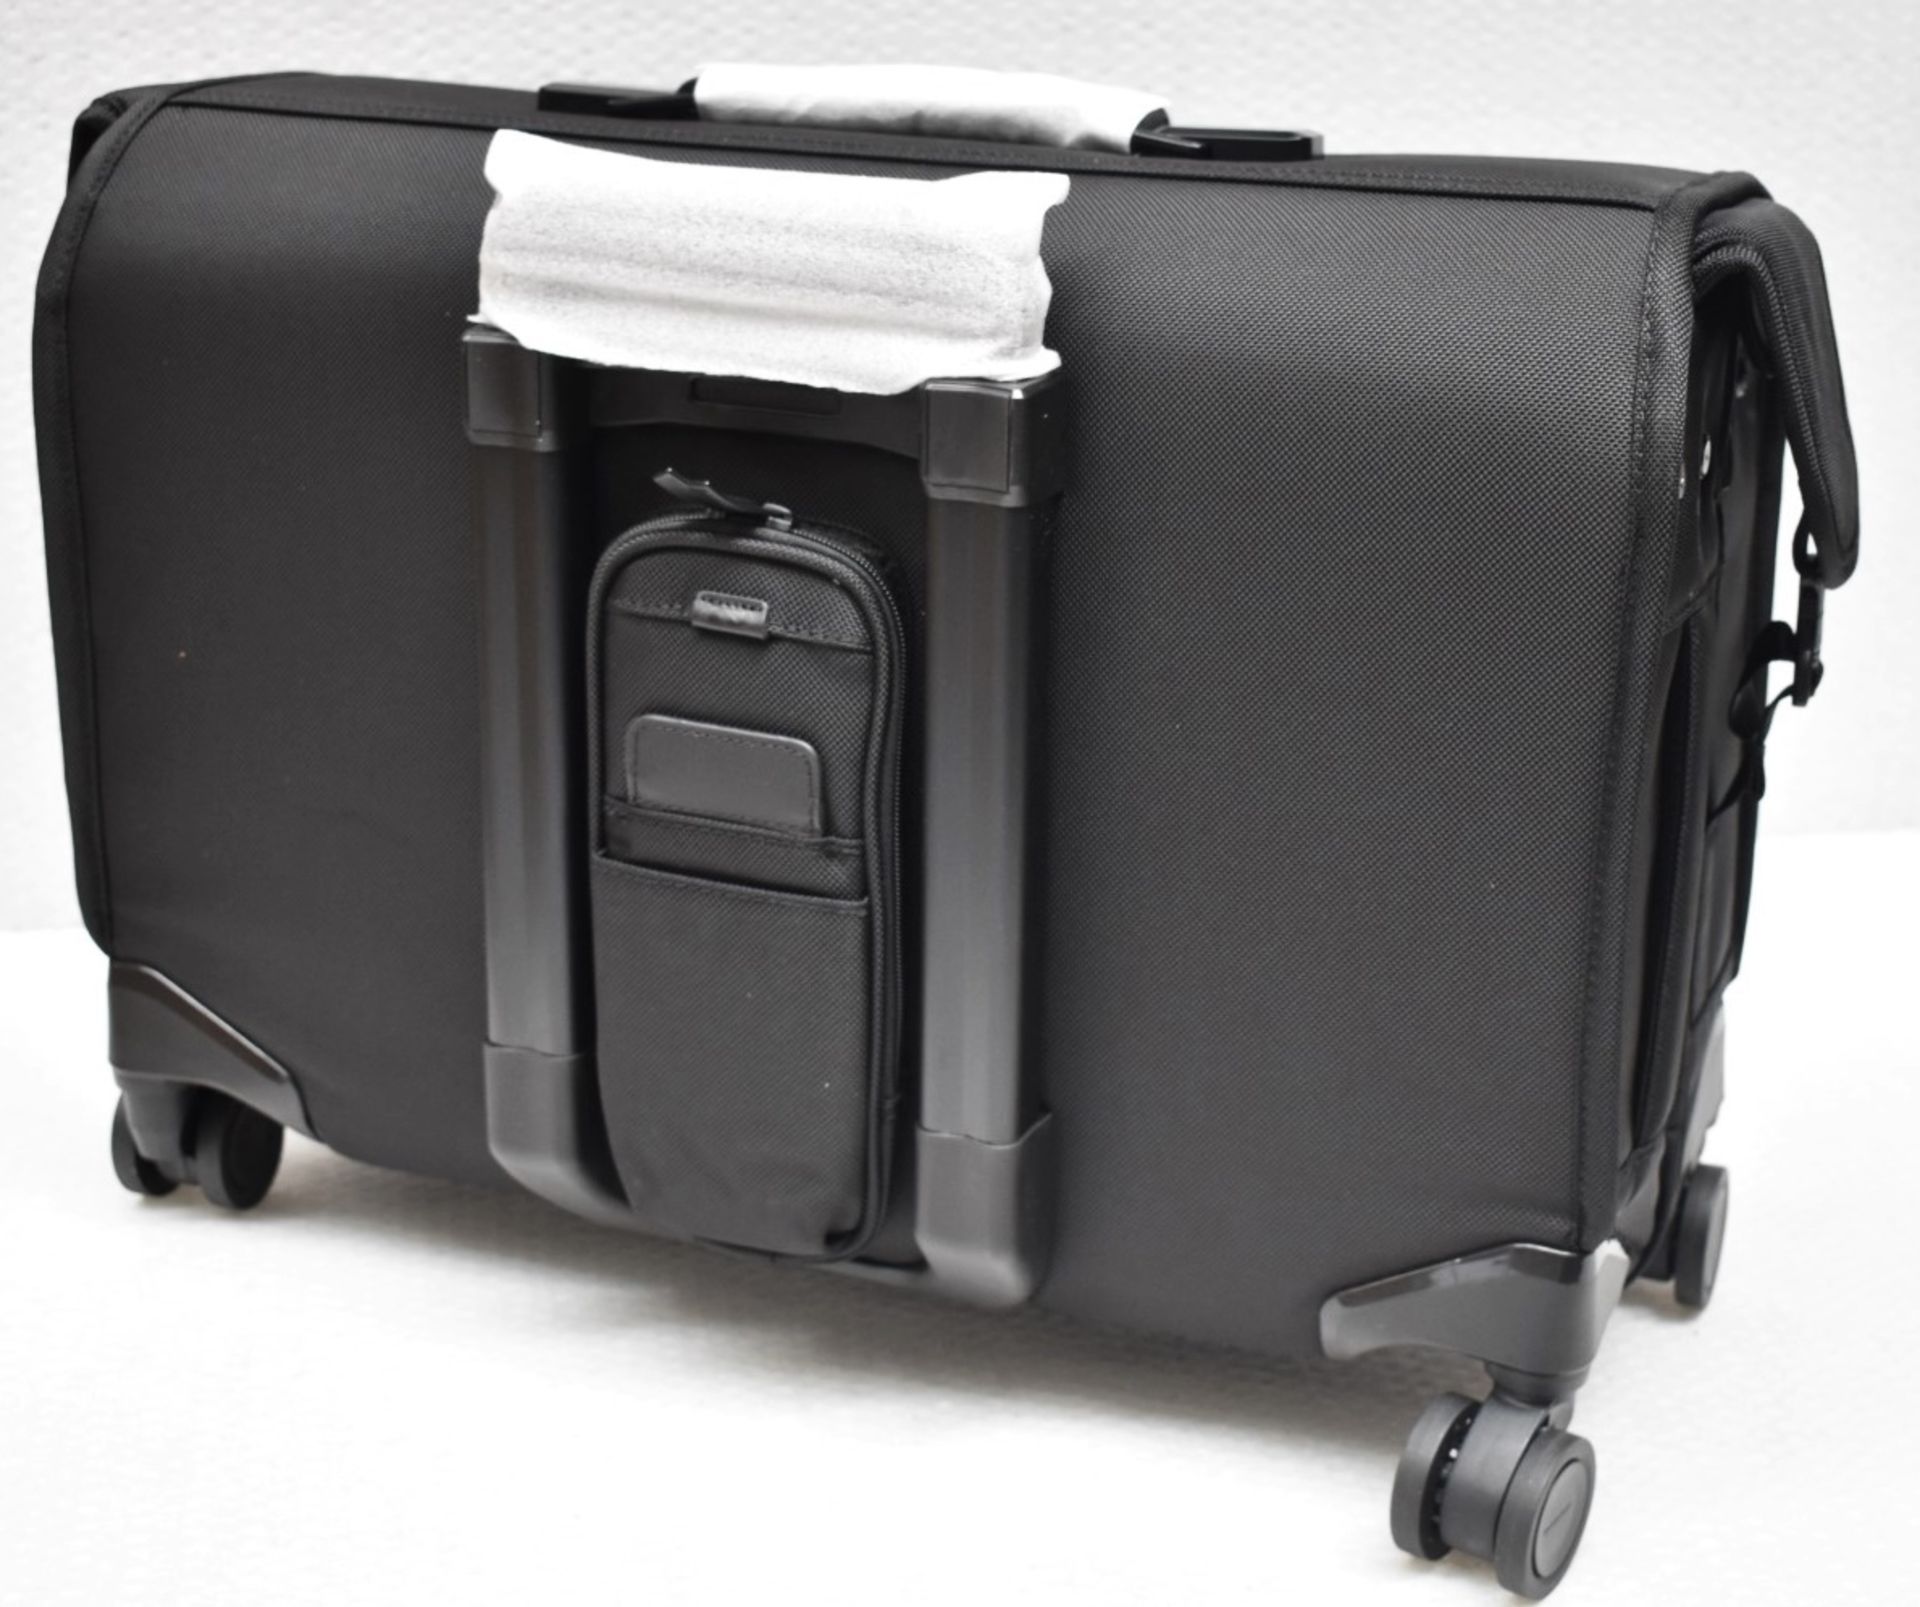 1 x BRIGGS & RILEY Wide Carry-On Baseline Garment Spinner Suitcase (40.5cm) - Original Price £629.00 - Image 8 of 24